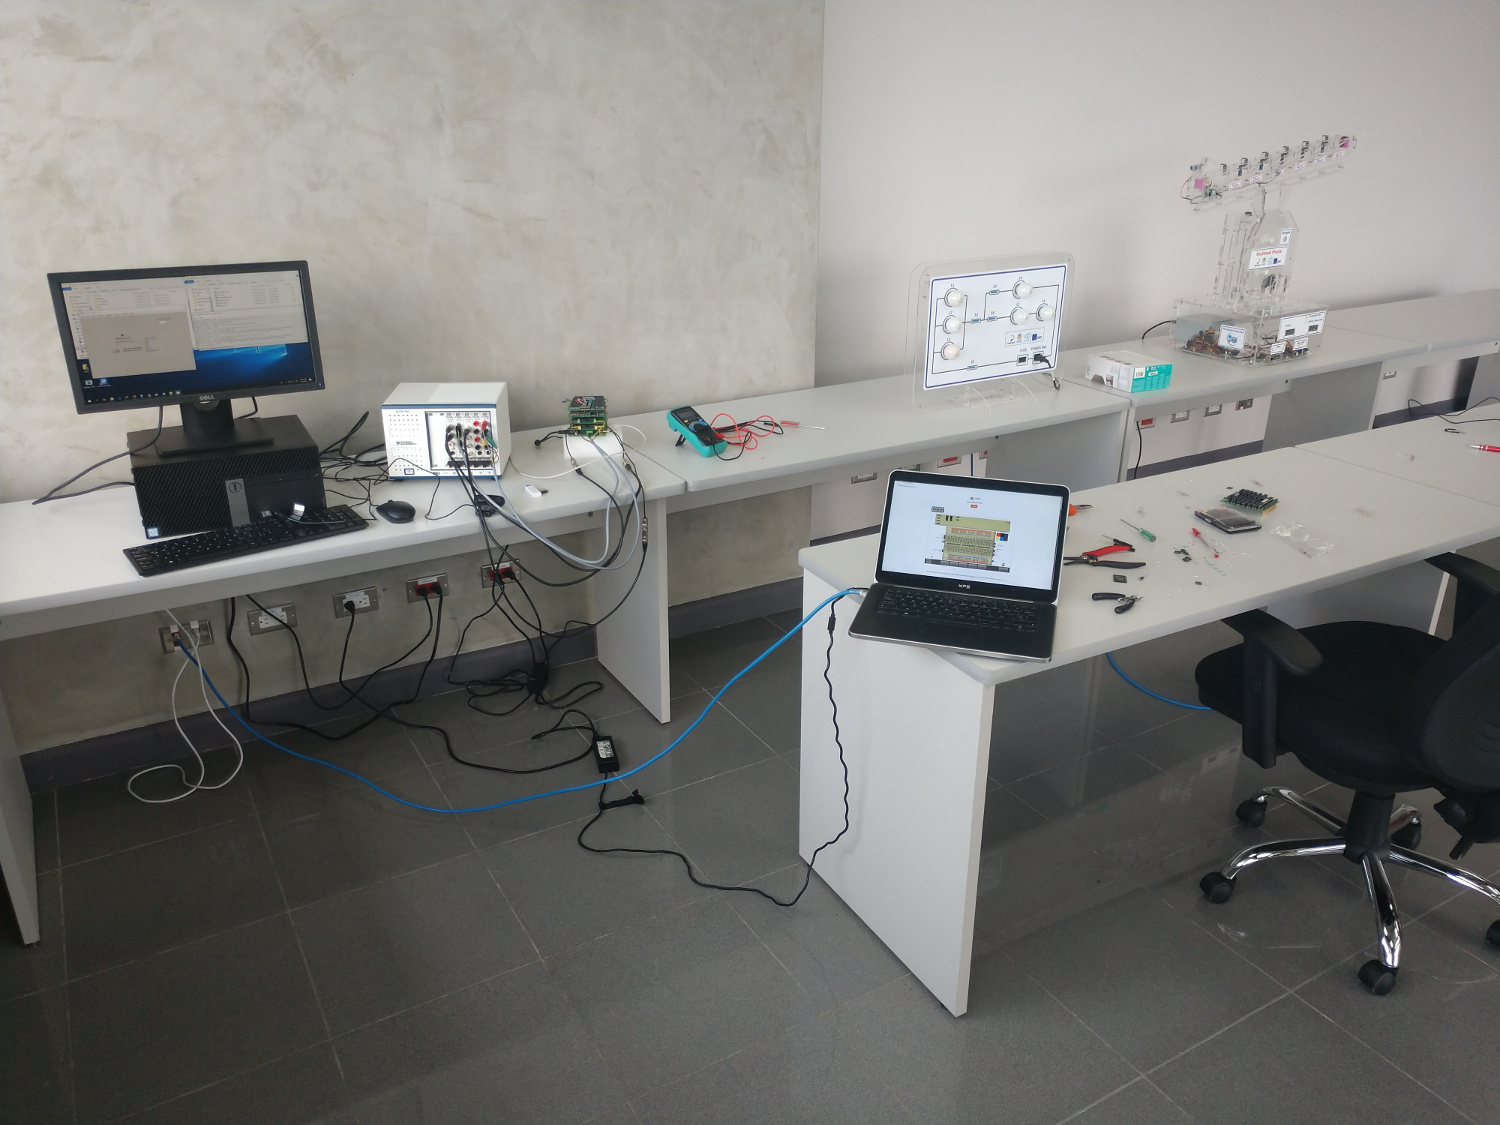 Electronics laboratory deployed in Costa Rica’s distance university UNED